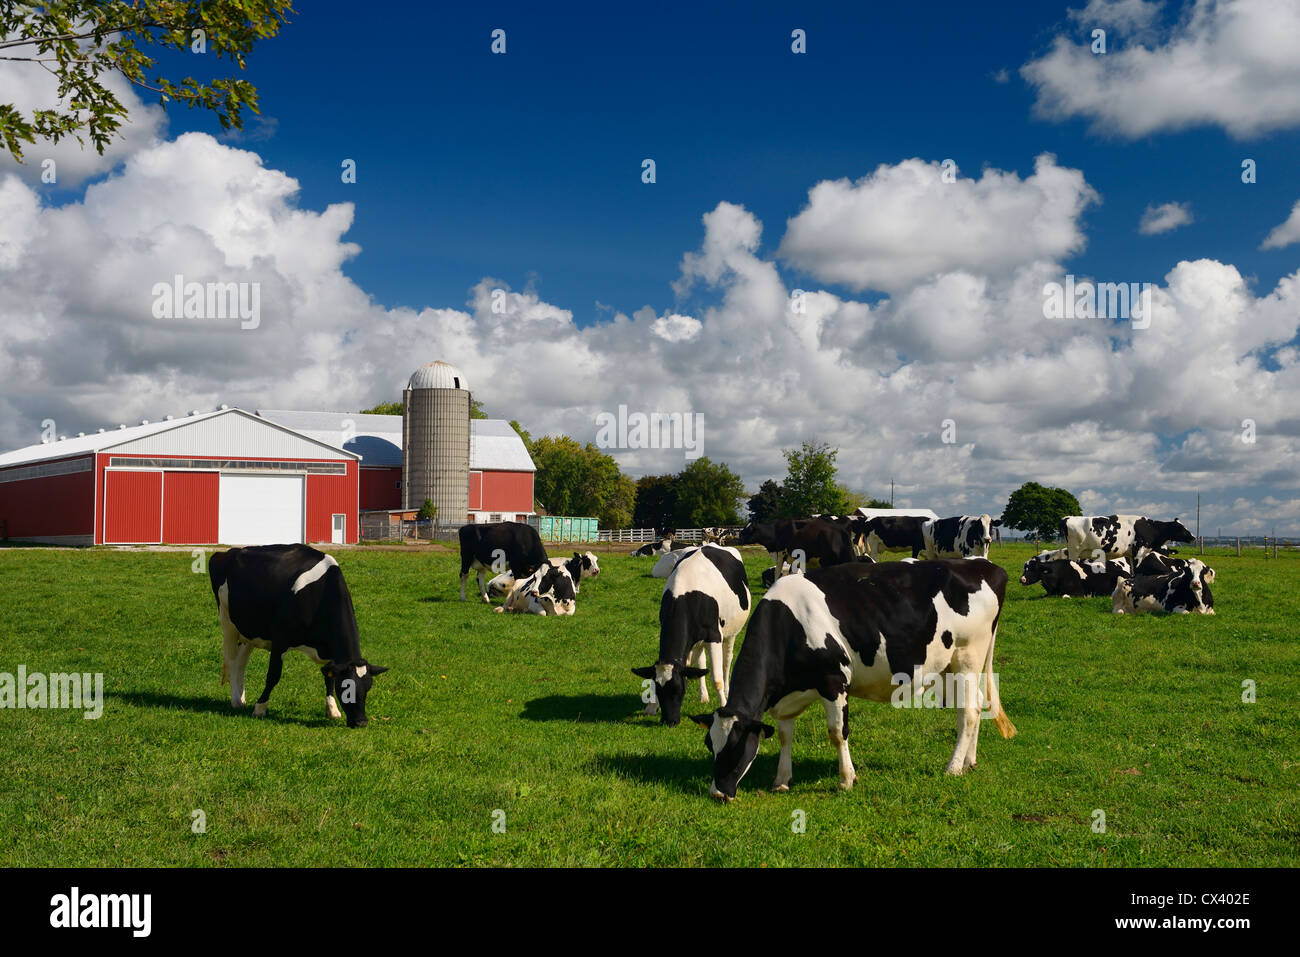 Holstein cows grazing in a grassy farm pasture with red barn and silo in summer Vaughan Ontario Stock Photo